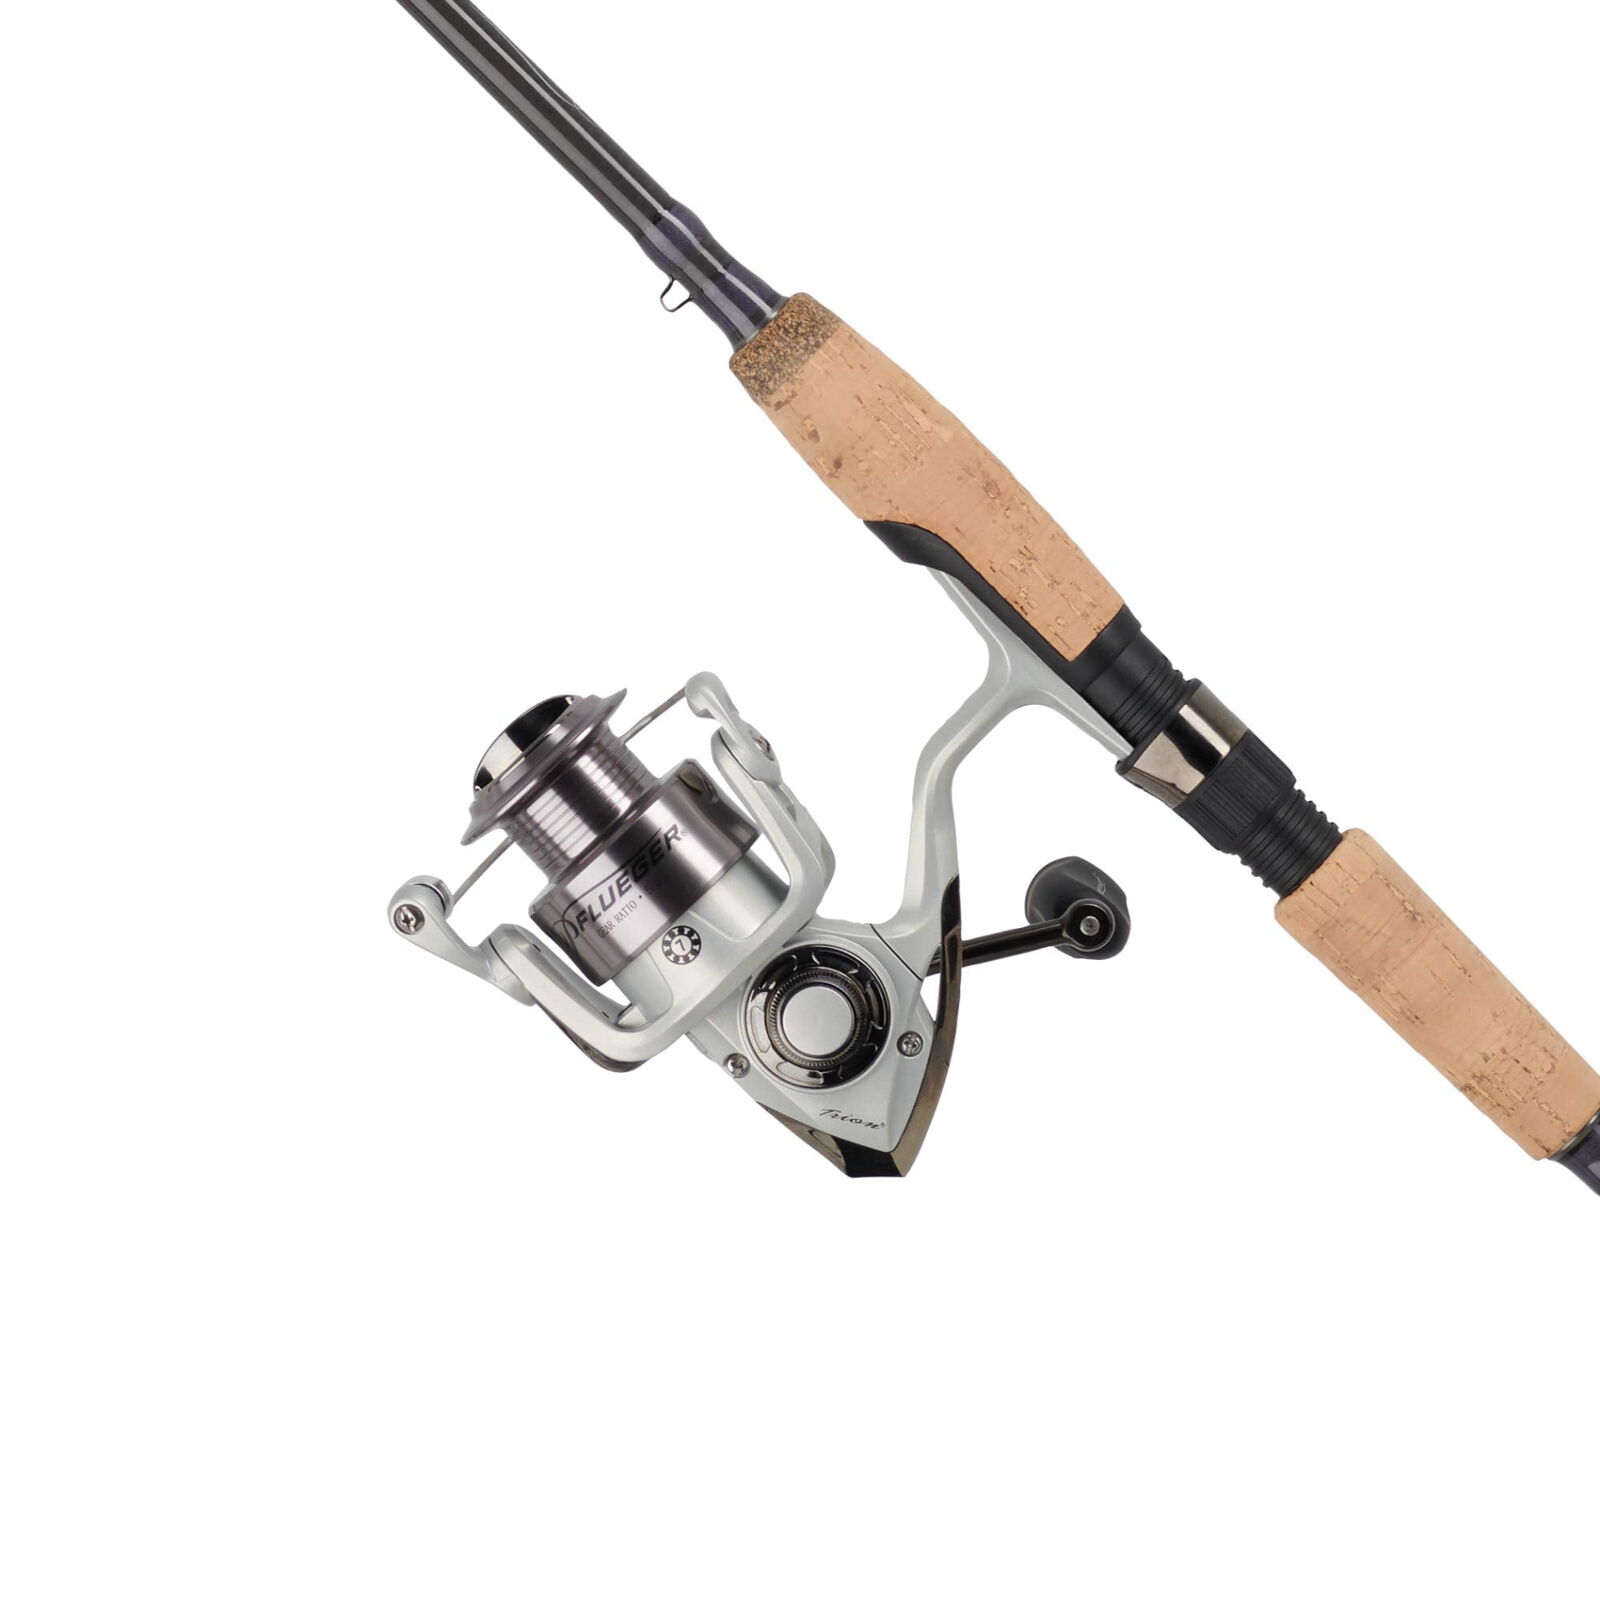 Pflueger 5'6" Trion Spinning Rod and Reel Combo Size 25 Reel I-M6 Graphite Blank Unbranded - фотография #2